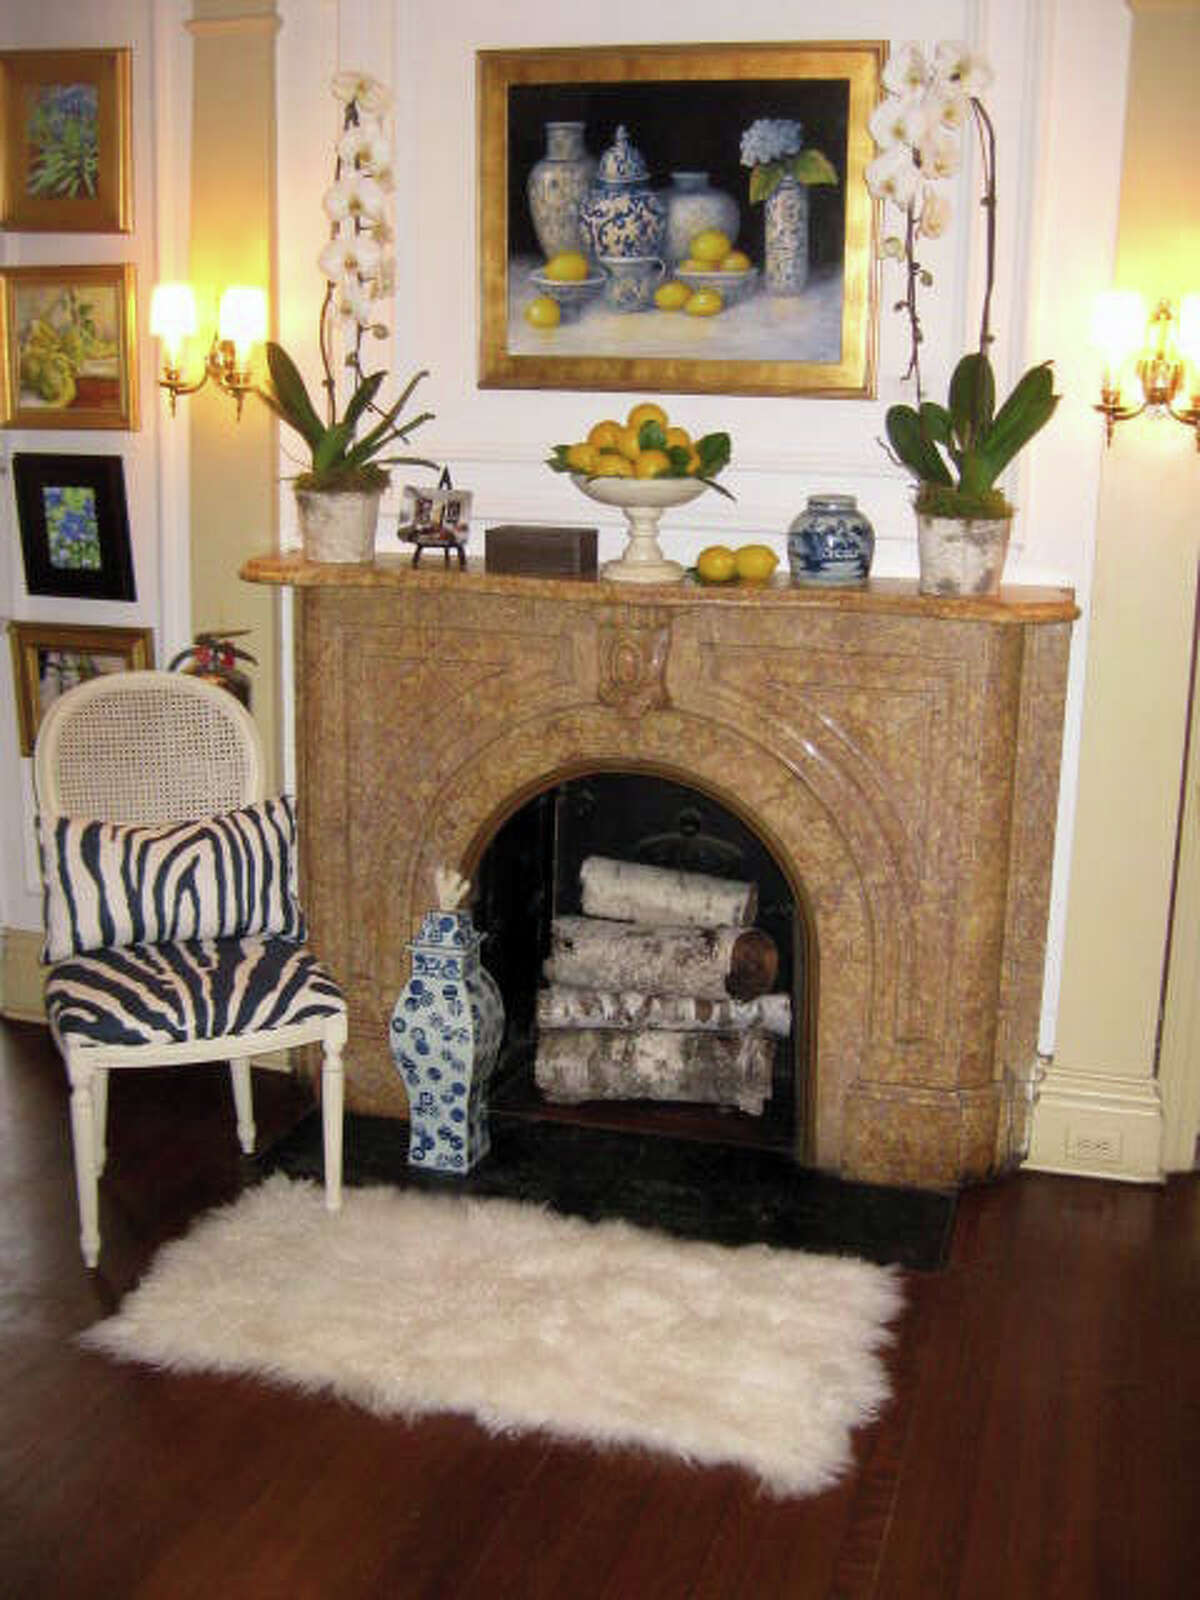 This mantel design is by Christopher Stevens, who will be featured in the art & design show at the Burr mansion March 22-24 in Fairfield.